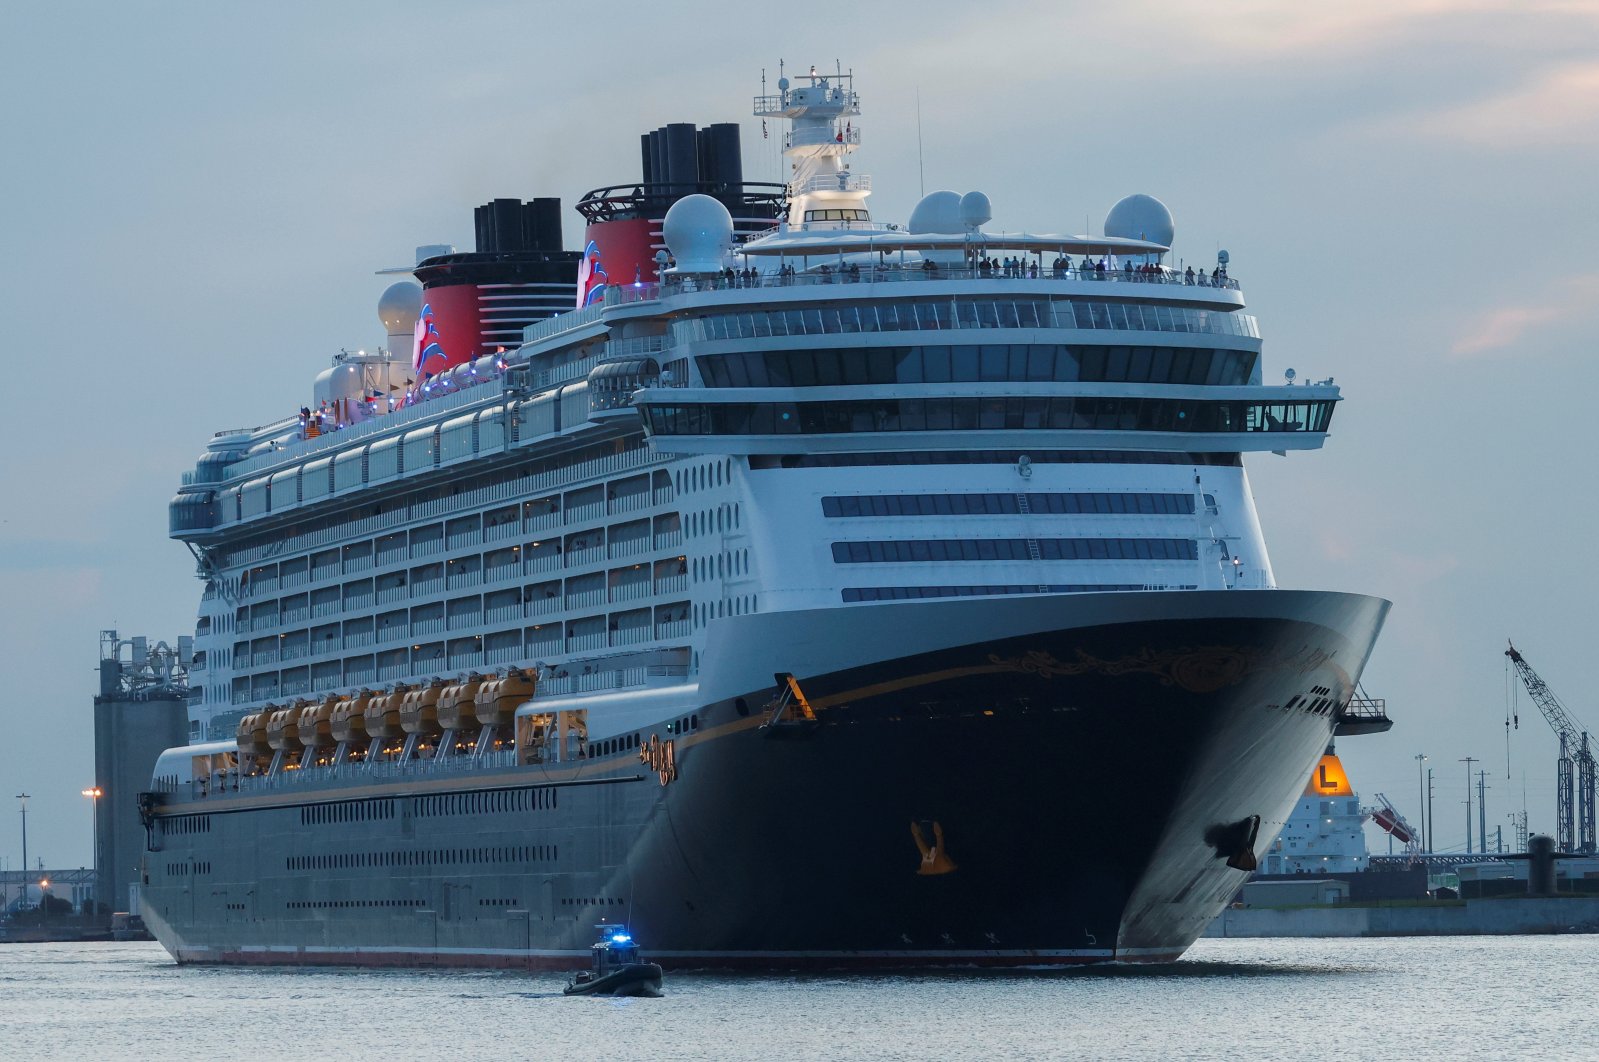 Disney Dream, a Disney Cruise Lines&#039; ship, sails to the Bahamas on the first Disney cruise for paying customers since they were stopped during the coronavirus pandemic, Port Canaveral, Florida, U.S., Aug. 9, 2021. (Reuters Photo)